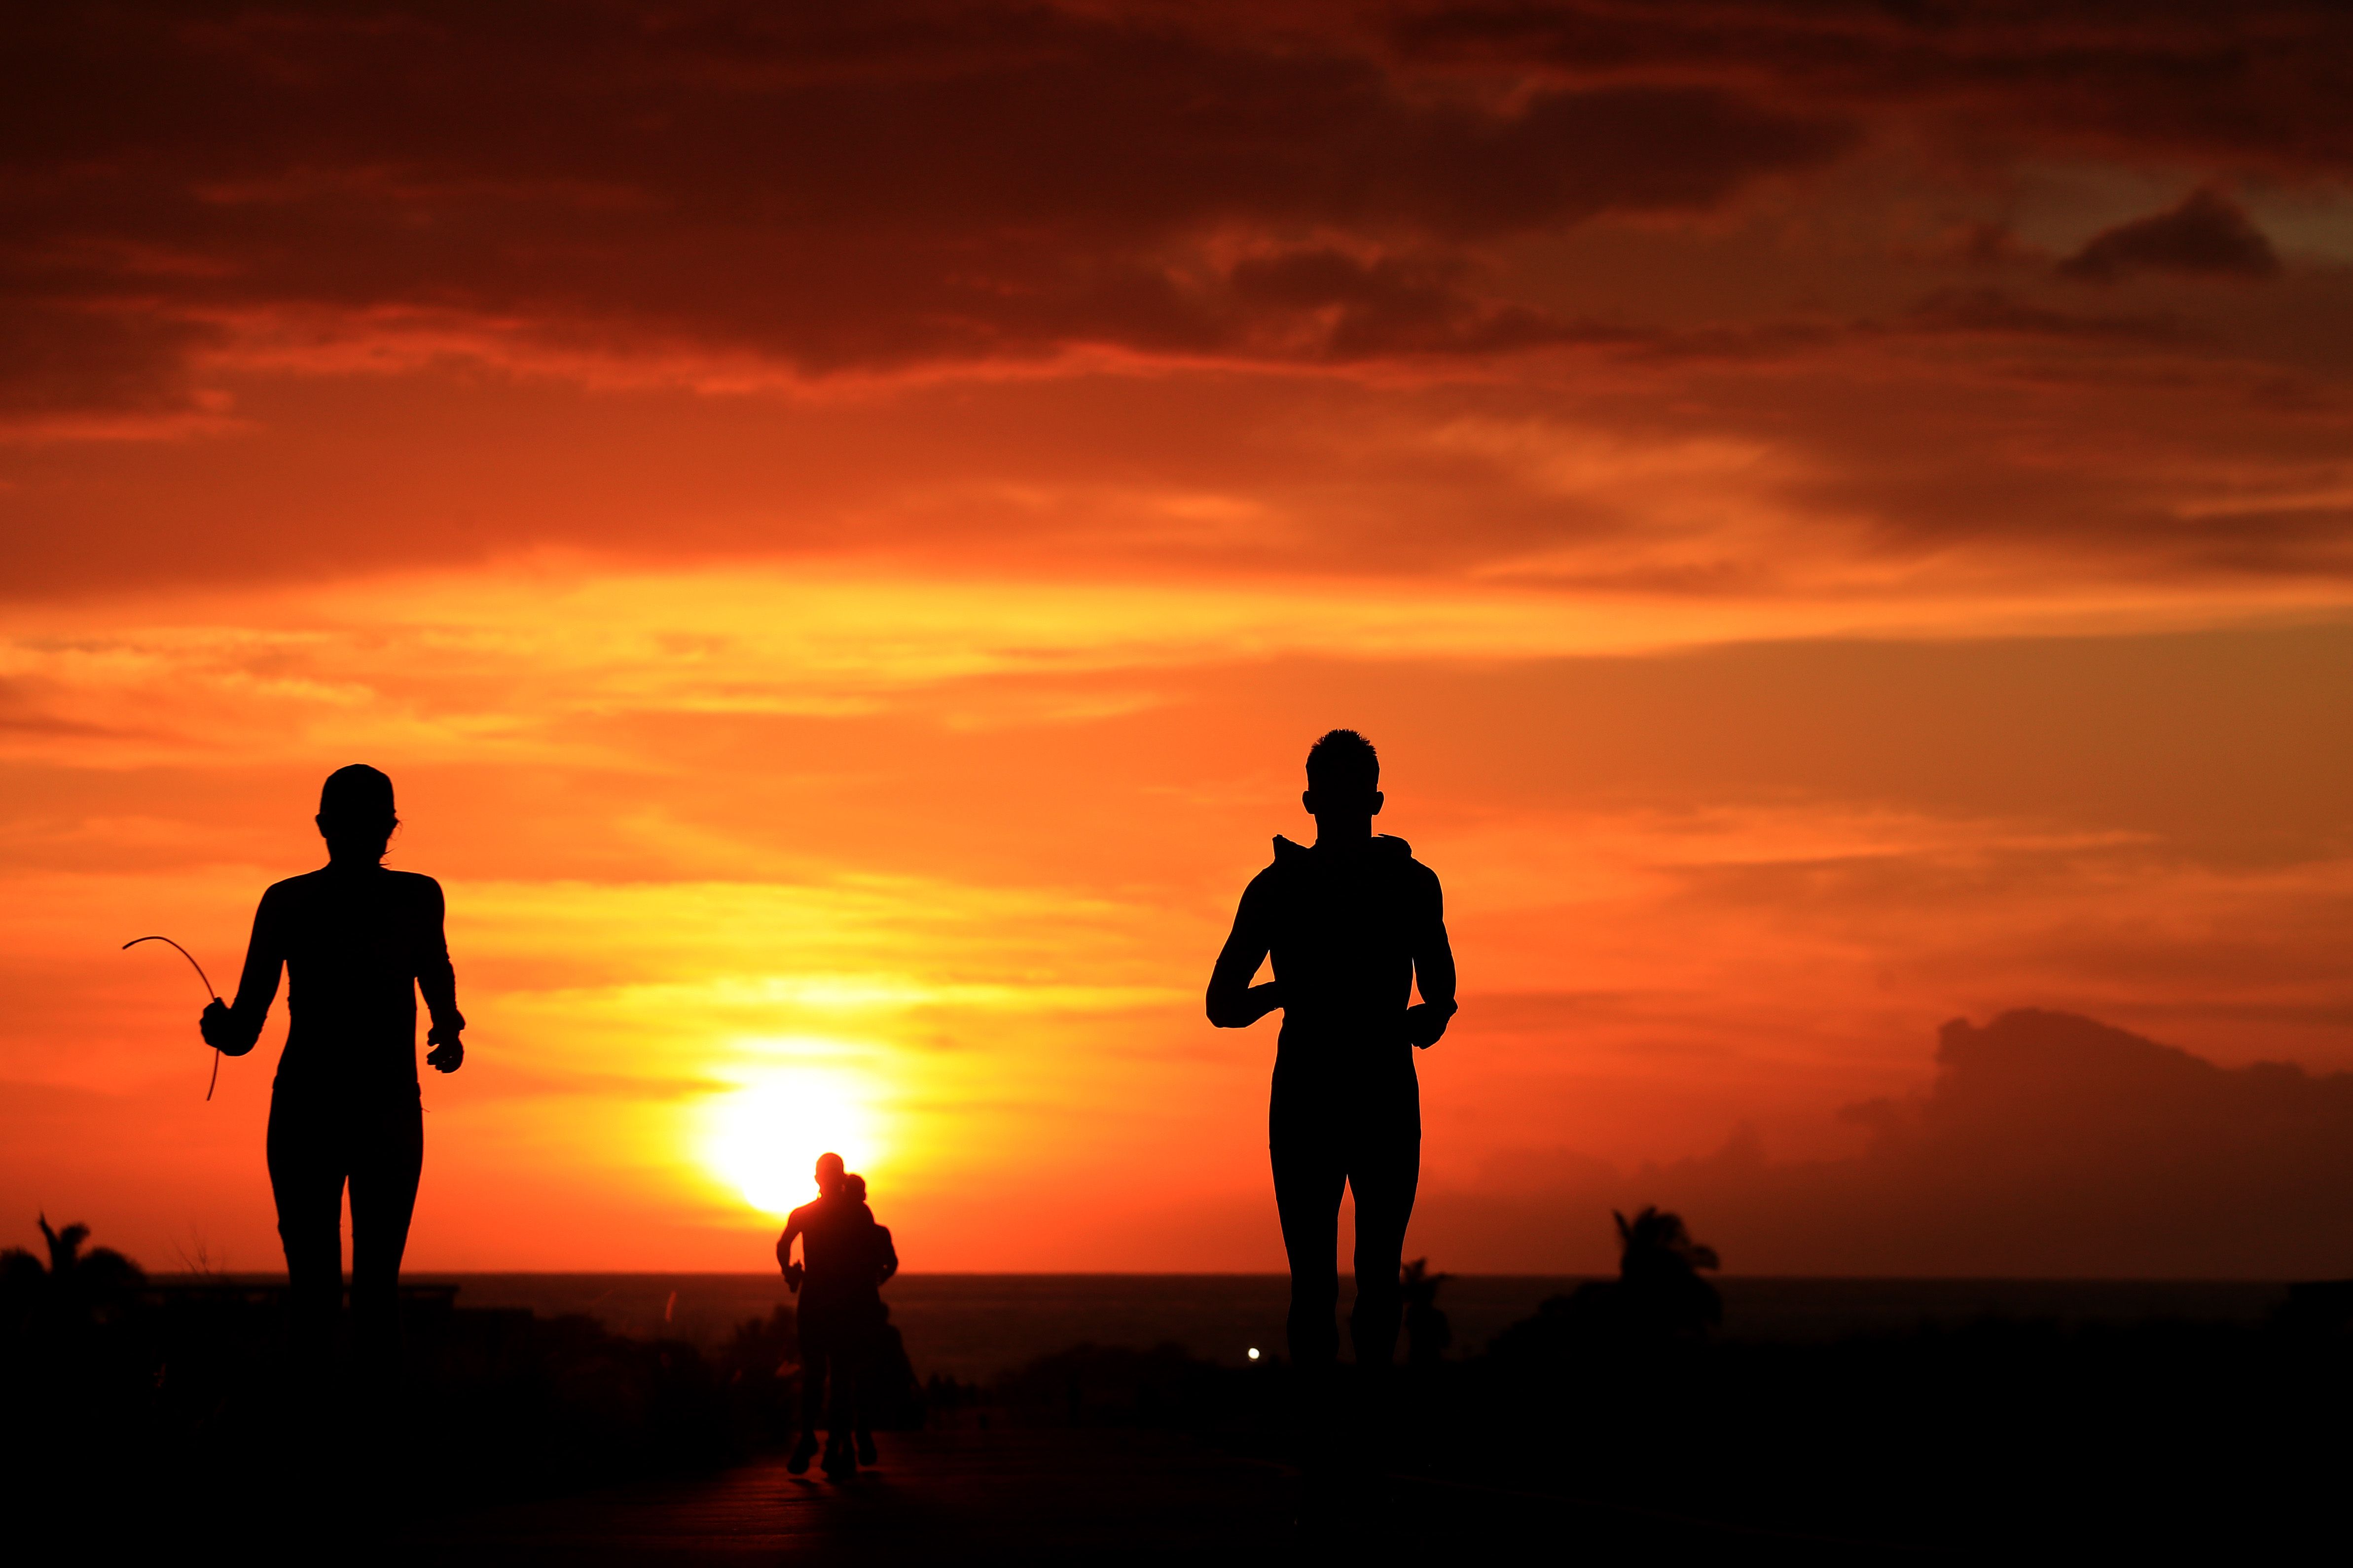 Runners at sunset